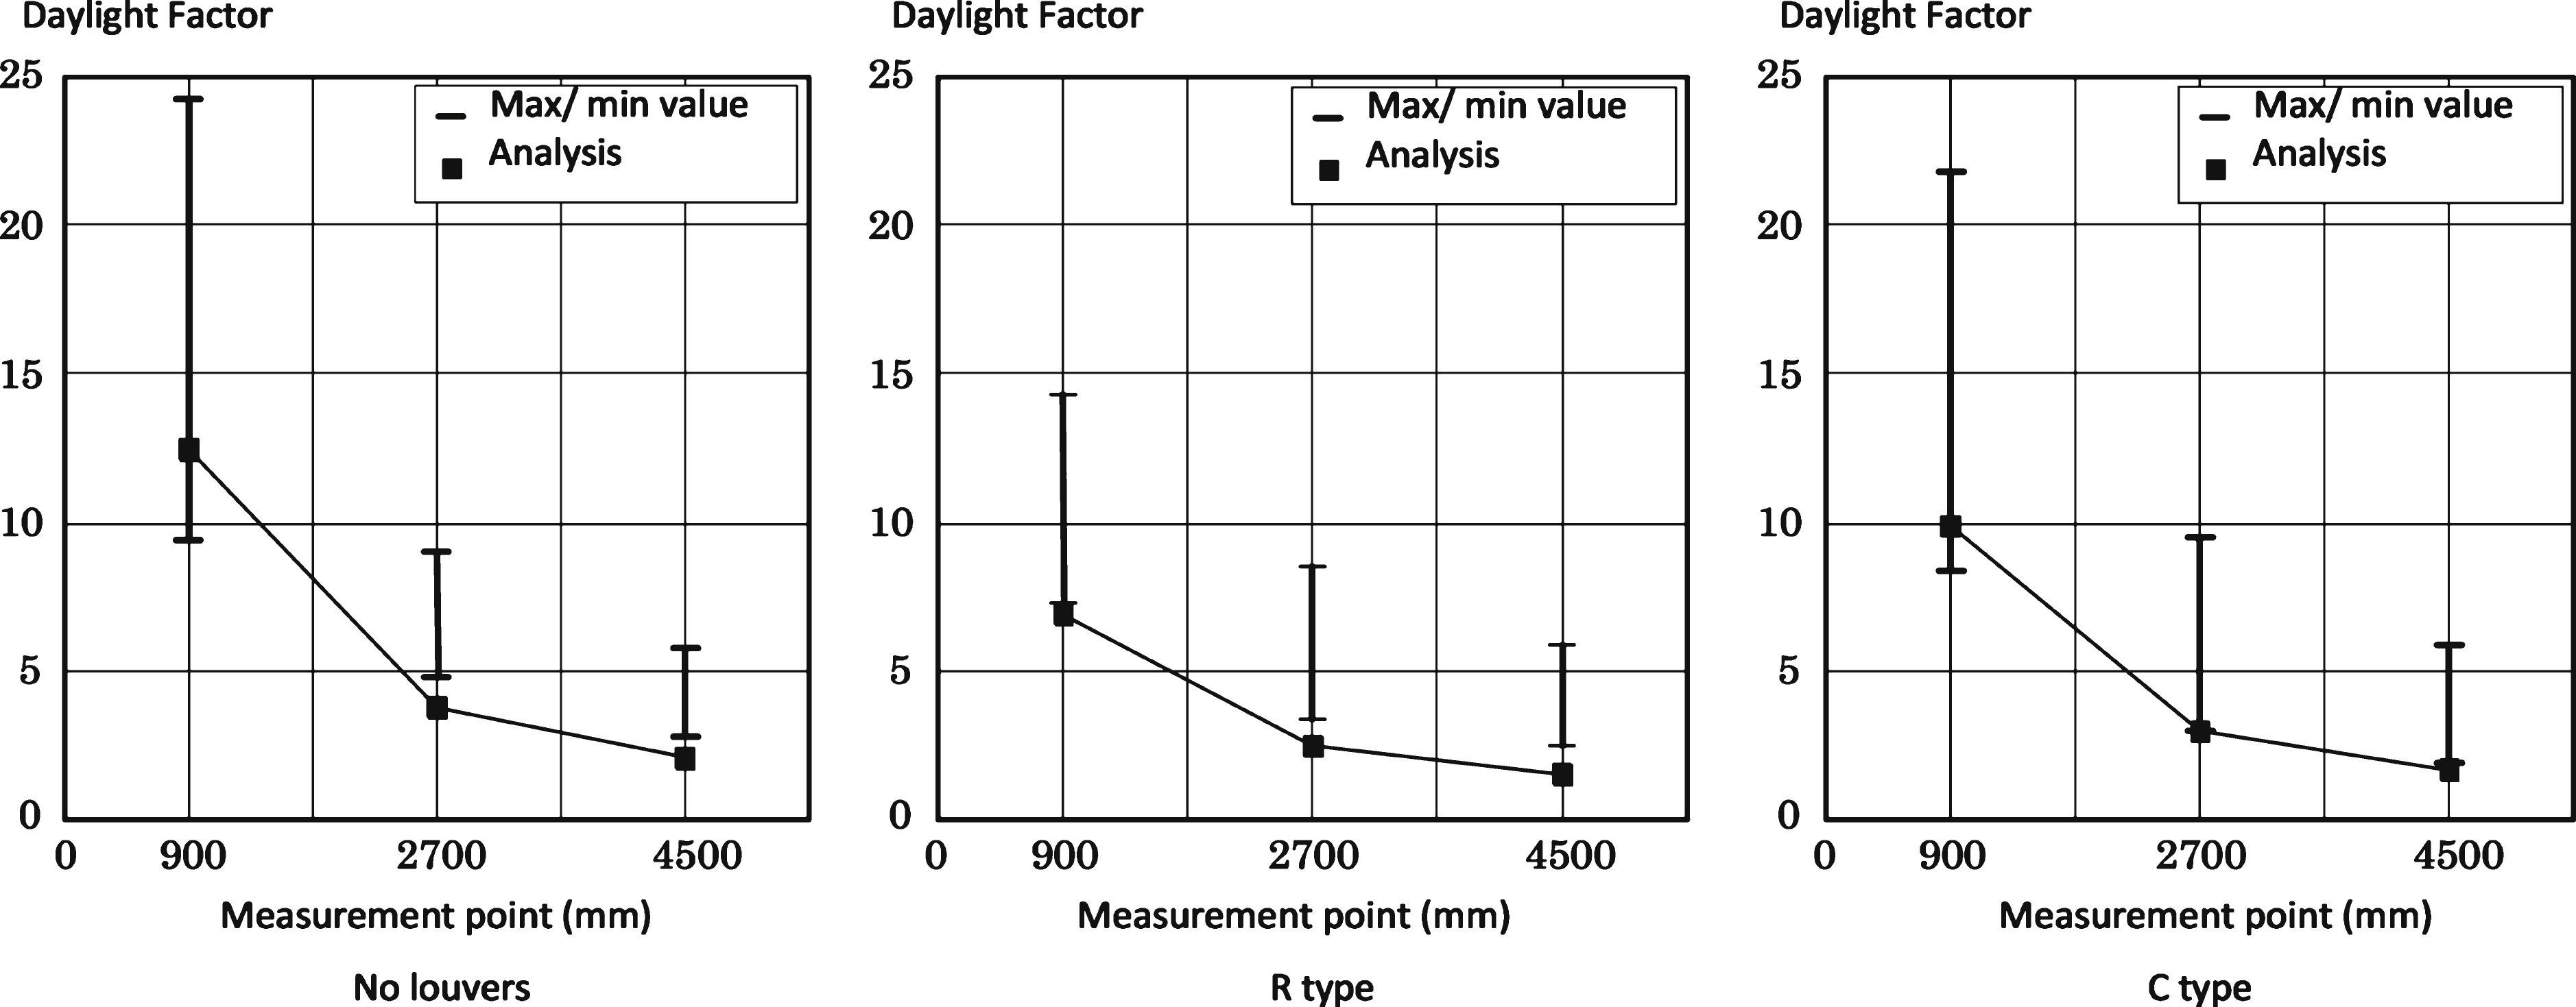 Comparison of experiment and analytical values (Daylight Factor % ).